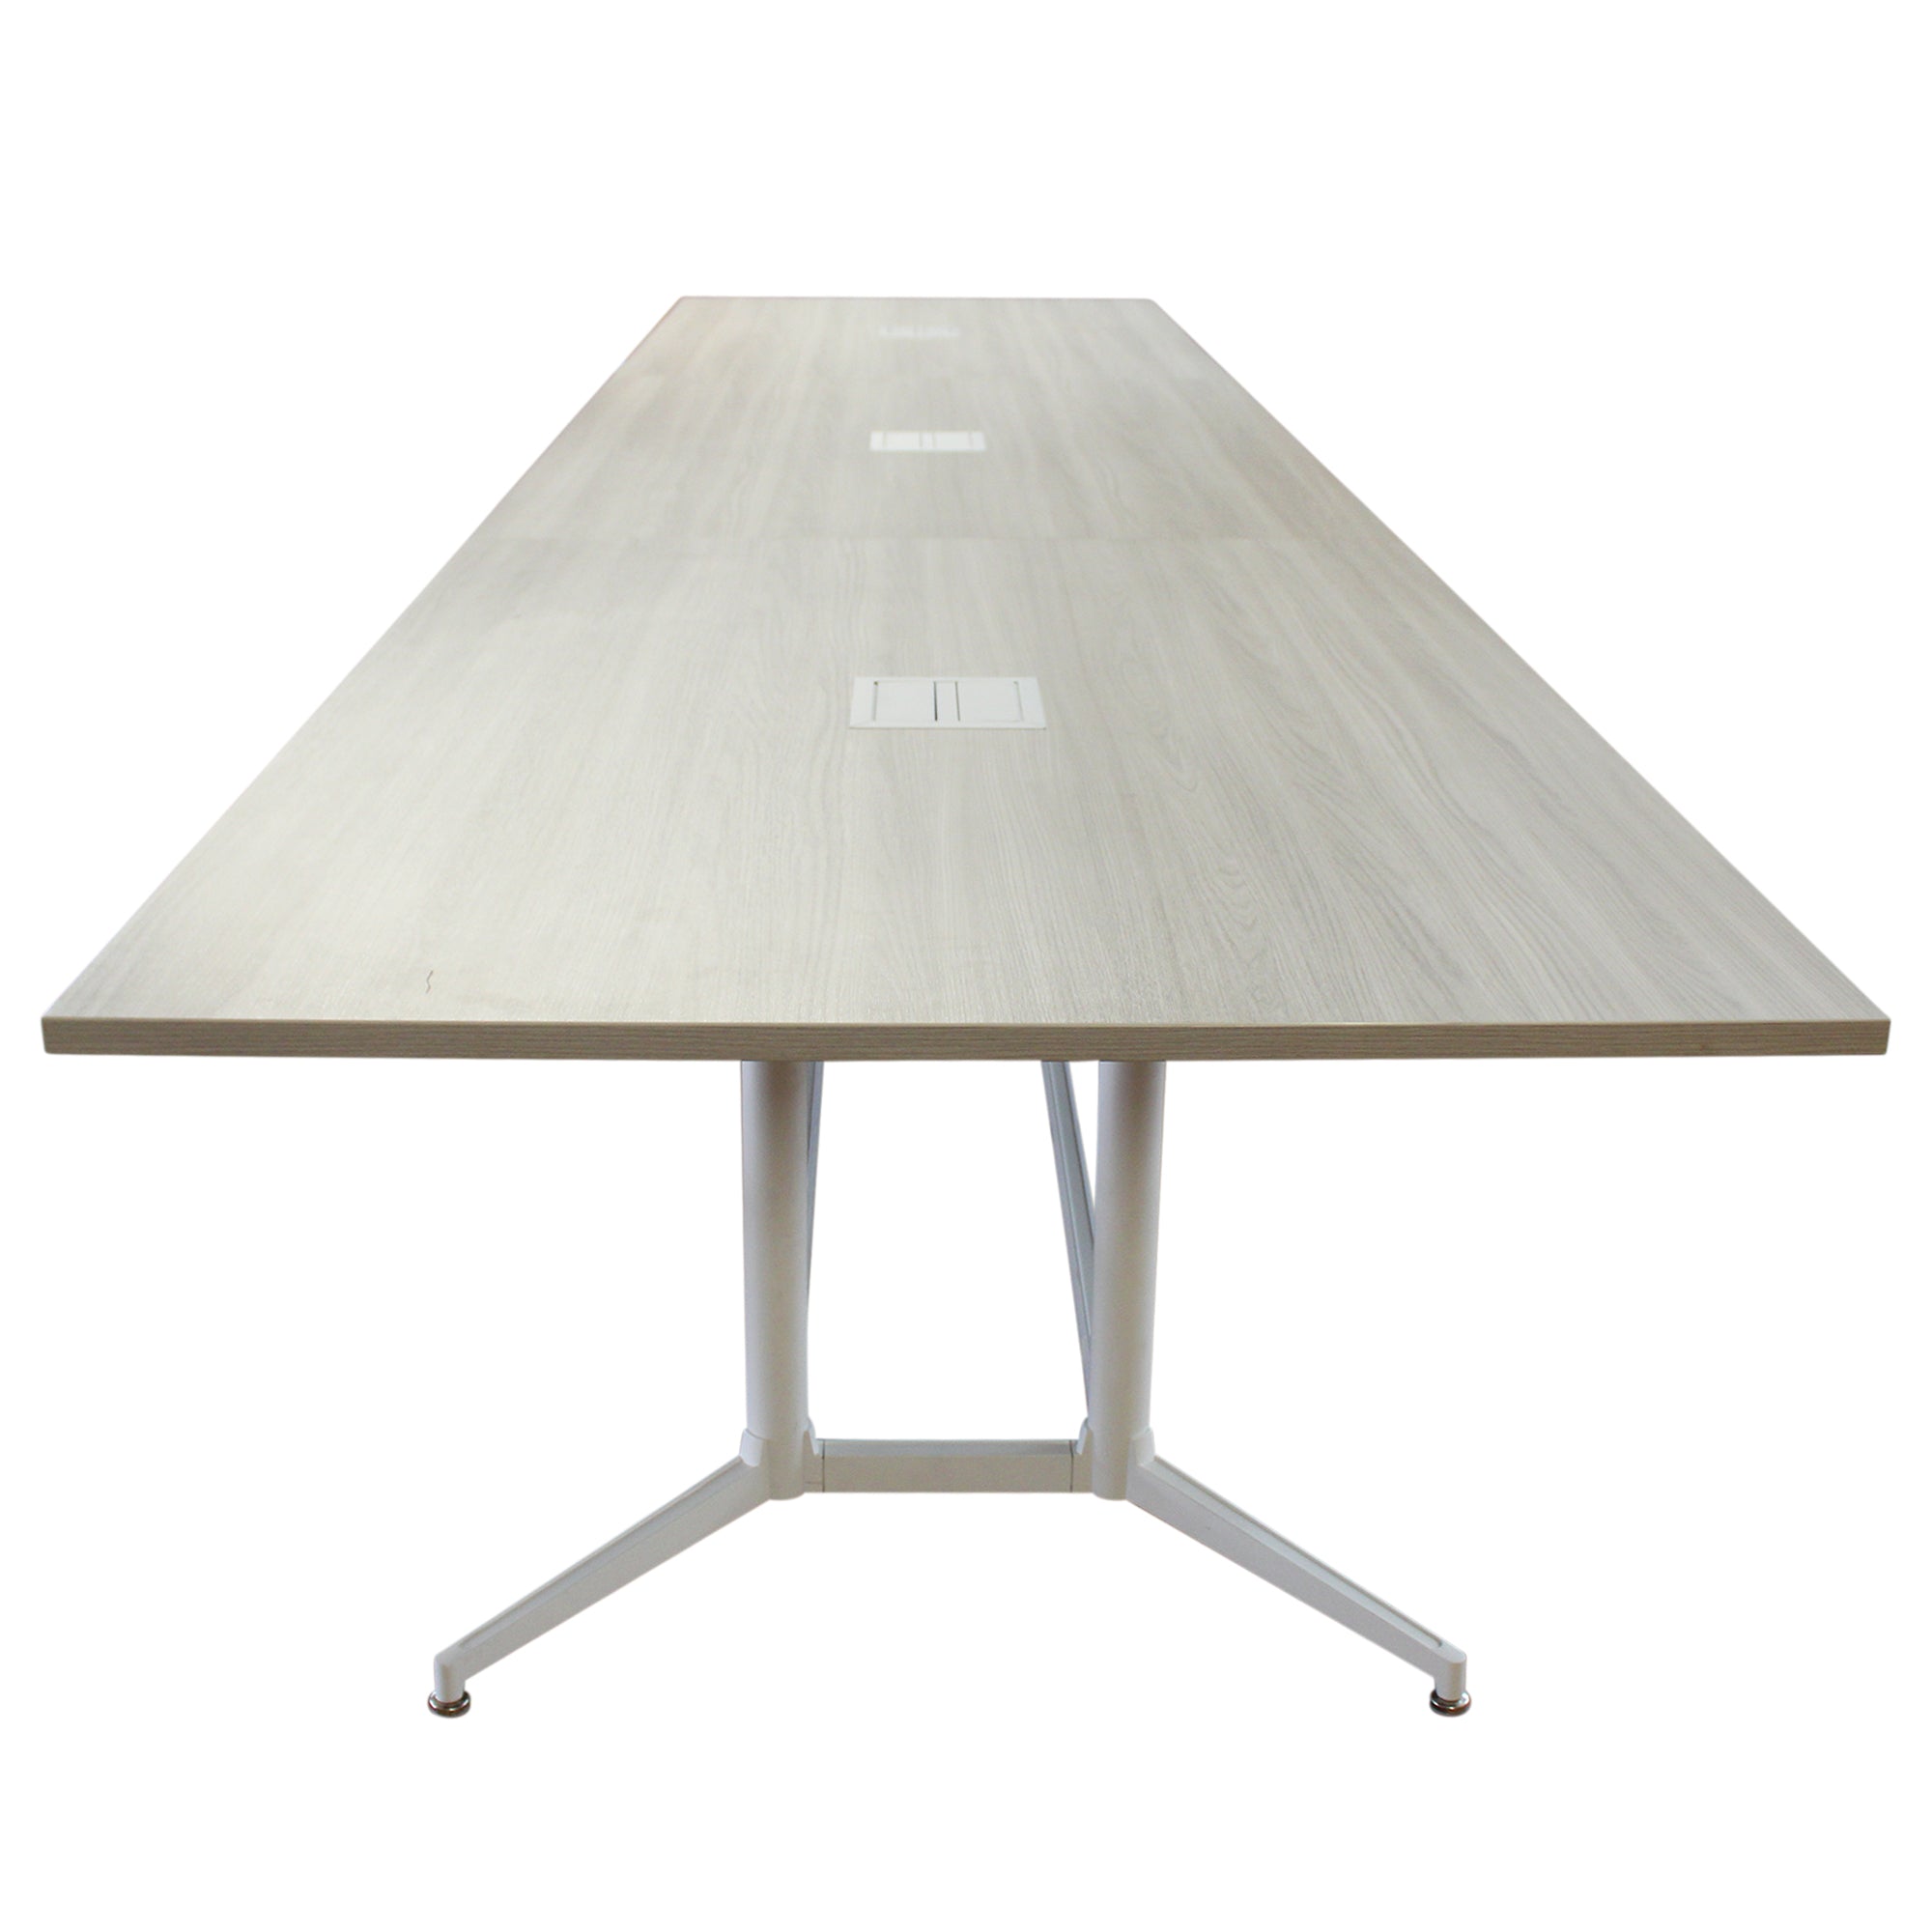 Haworth Conference Table - Preowned